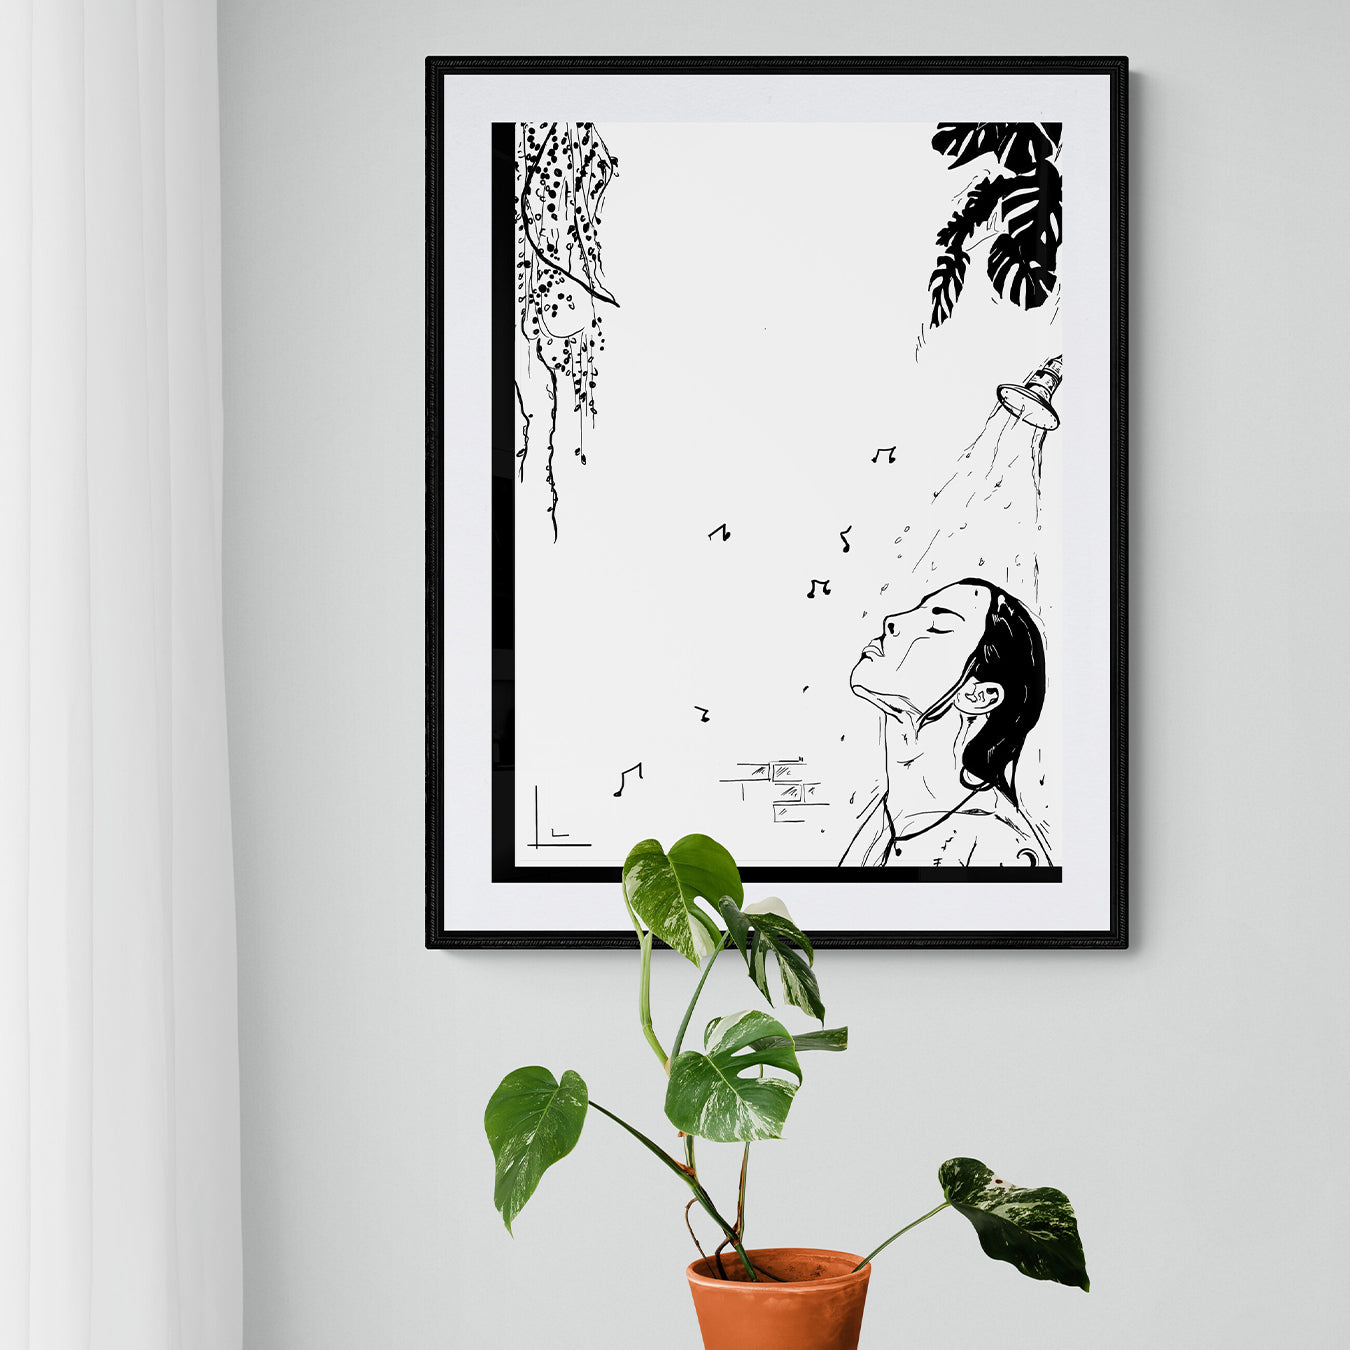 Courtney L Ellis Illustrations Art print by LGBTQ+ Illustration Artist Courtney Ellis. Wall art home decor and gifts. Long showers Loud Music Deep Thoughts. Woman showering with plans and music playing lost in her thoughts. Black and white drawing art print.